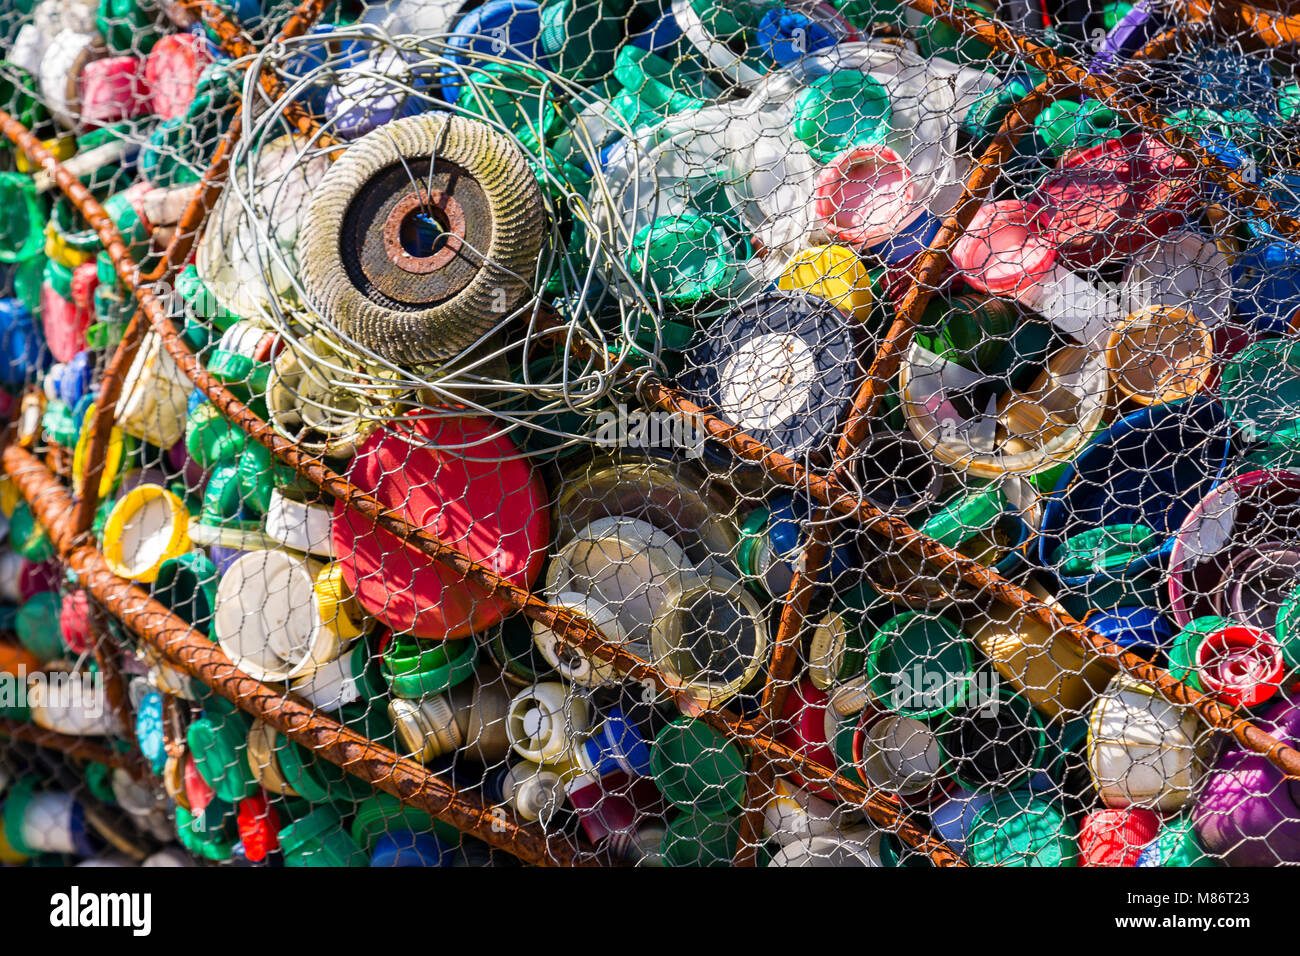 Waste plastic bottle tops in a wire mesh frame Stock Photo